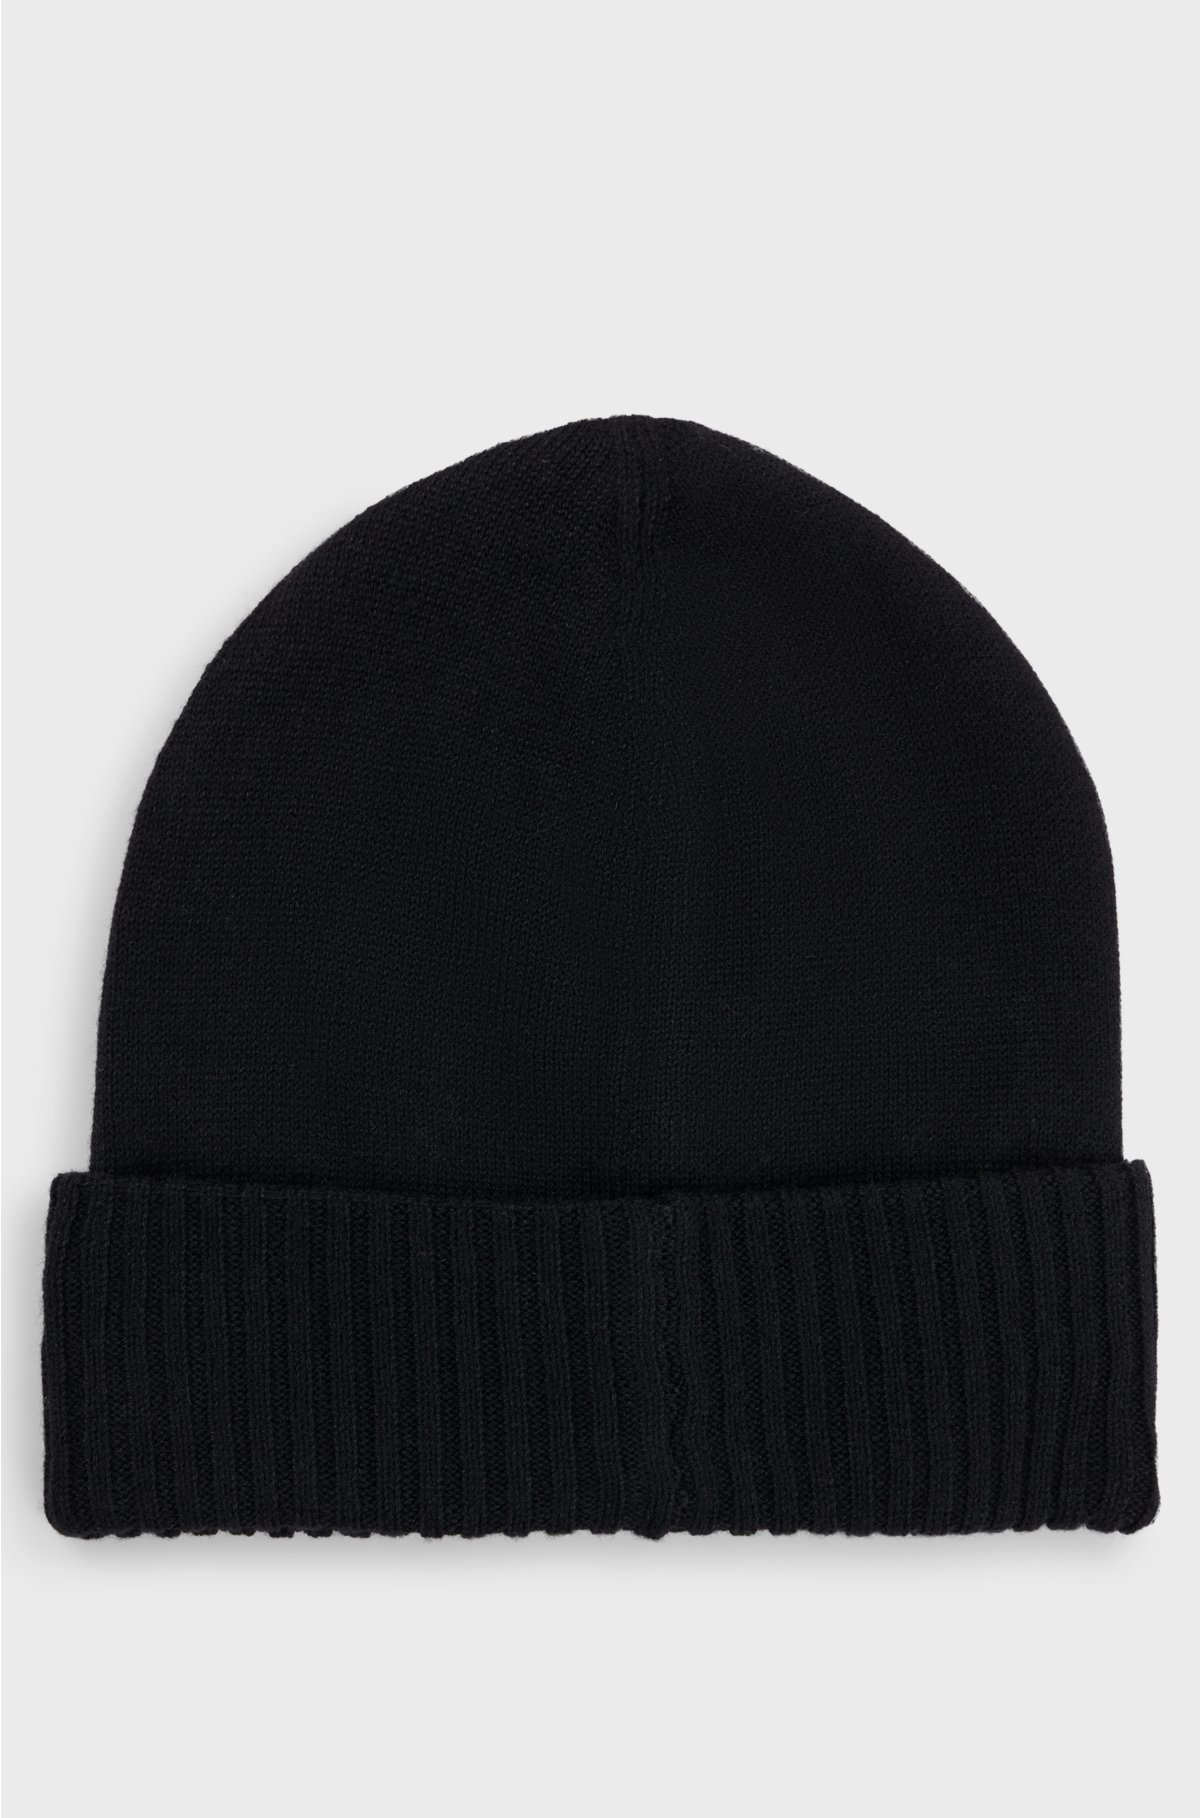 Kids' double-layer beanie hat with logo badge, Black